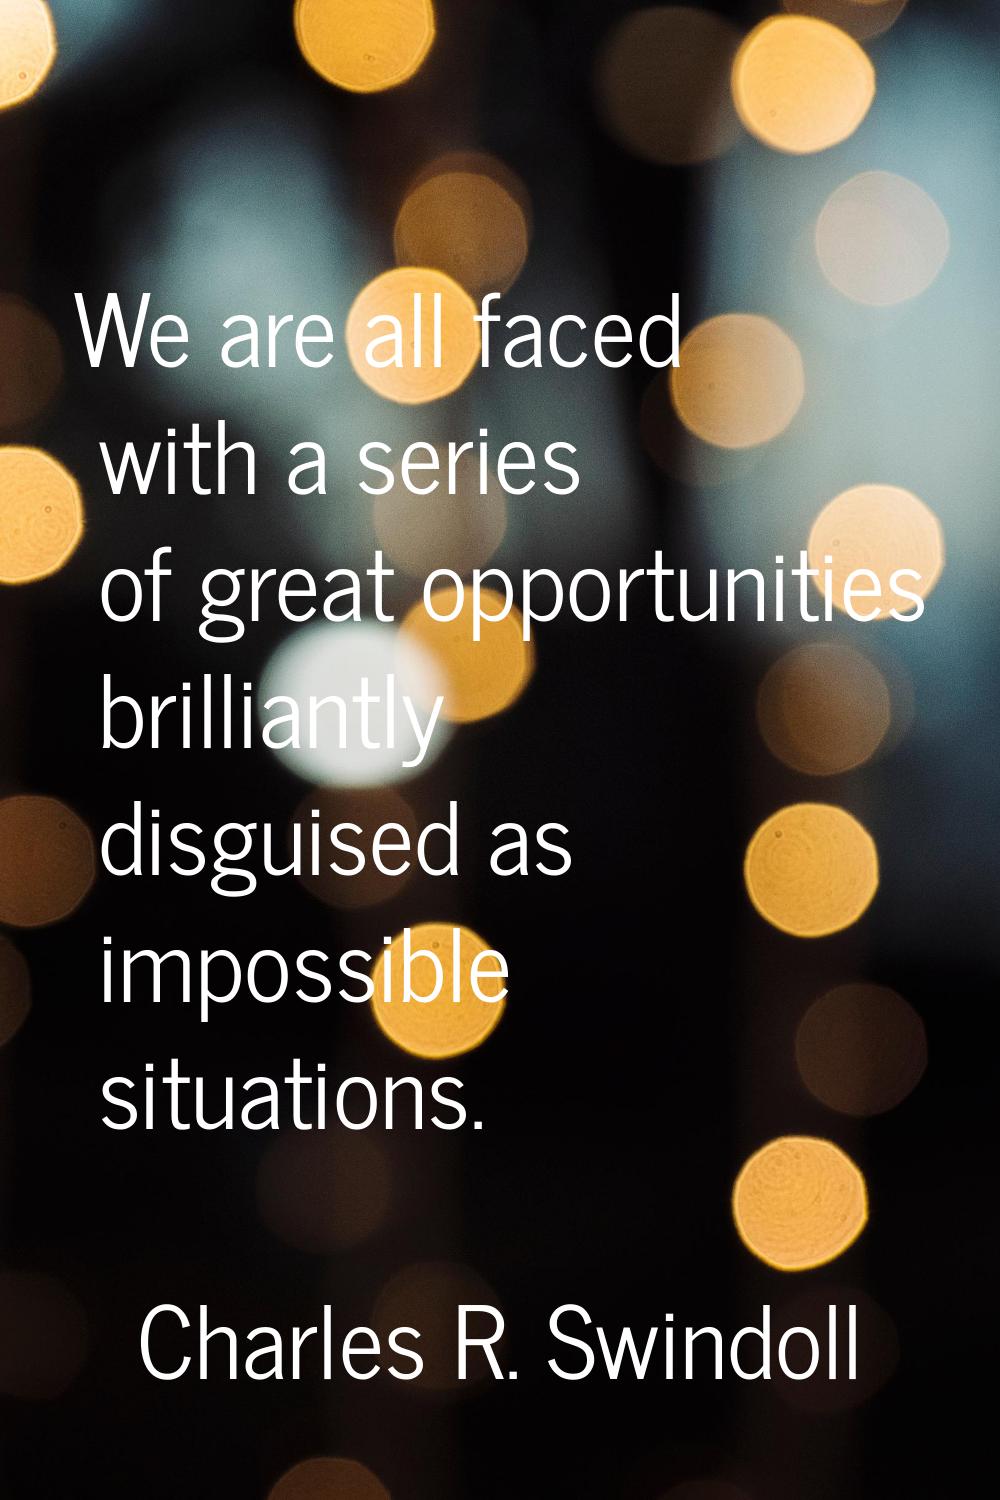 We are all faced with a series of great opportunities brilliantly disguised as impossible situation